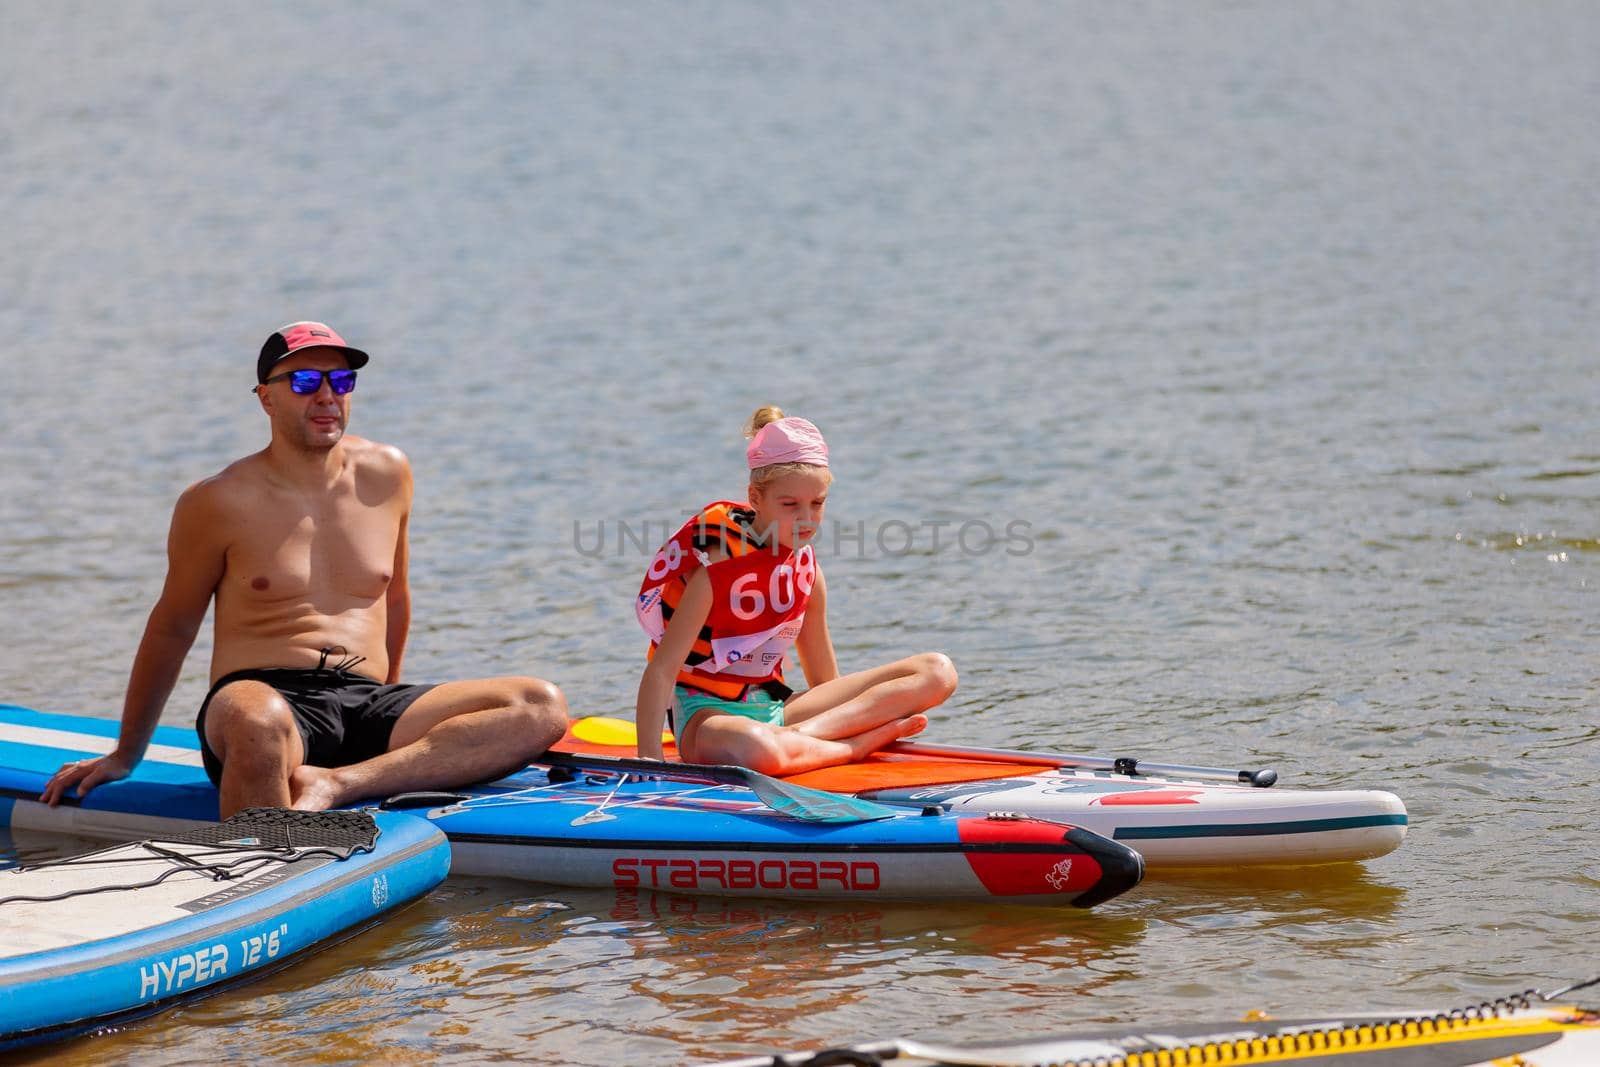 A child swims on a surfboard, pushing off with a paddle. Paddleboarding. Russia Zelenograd 14 August 2021